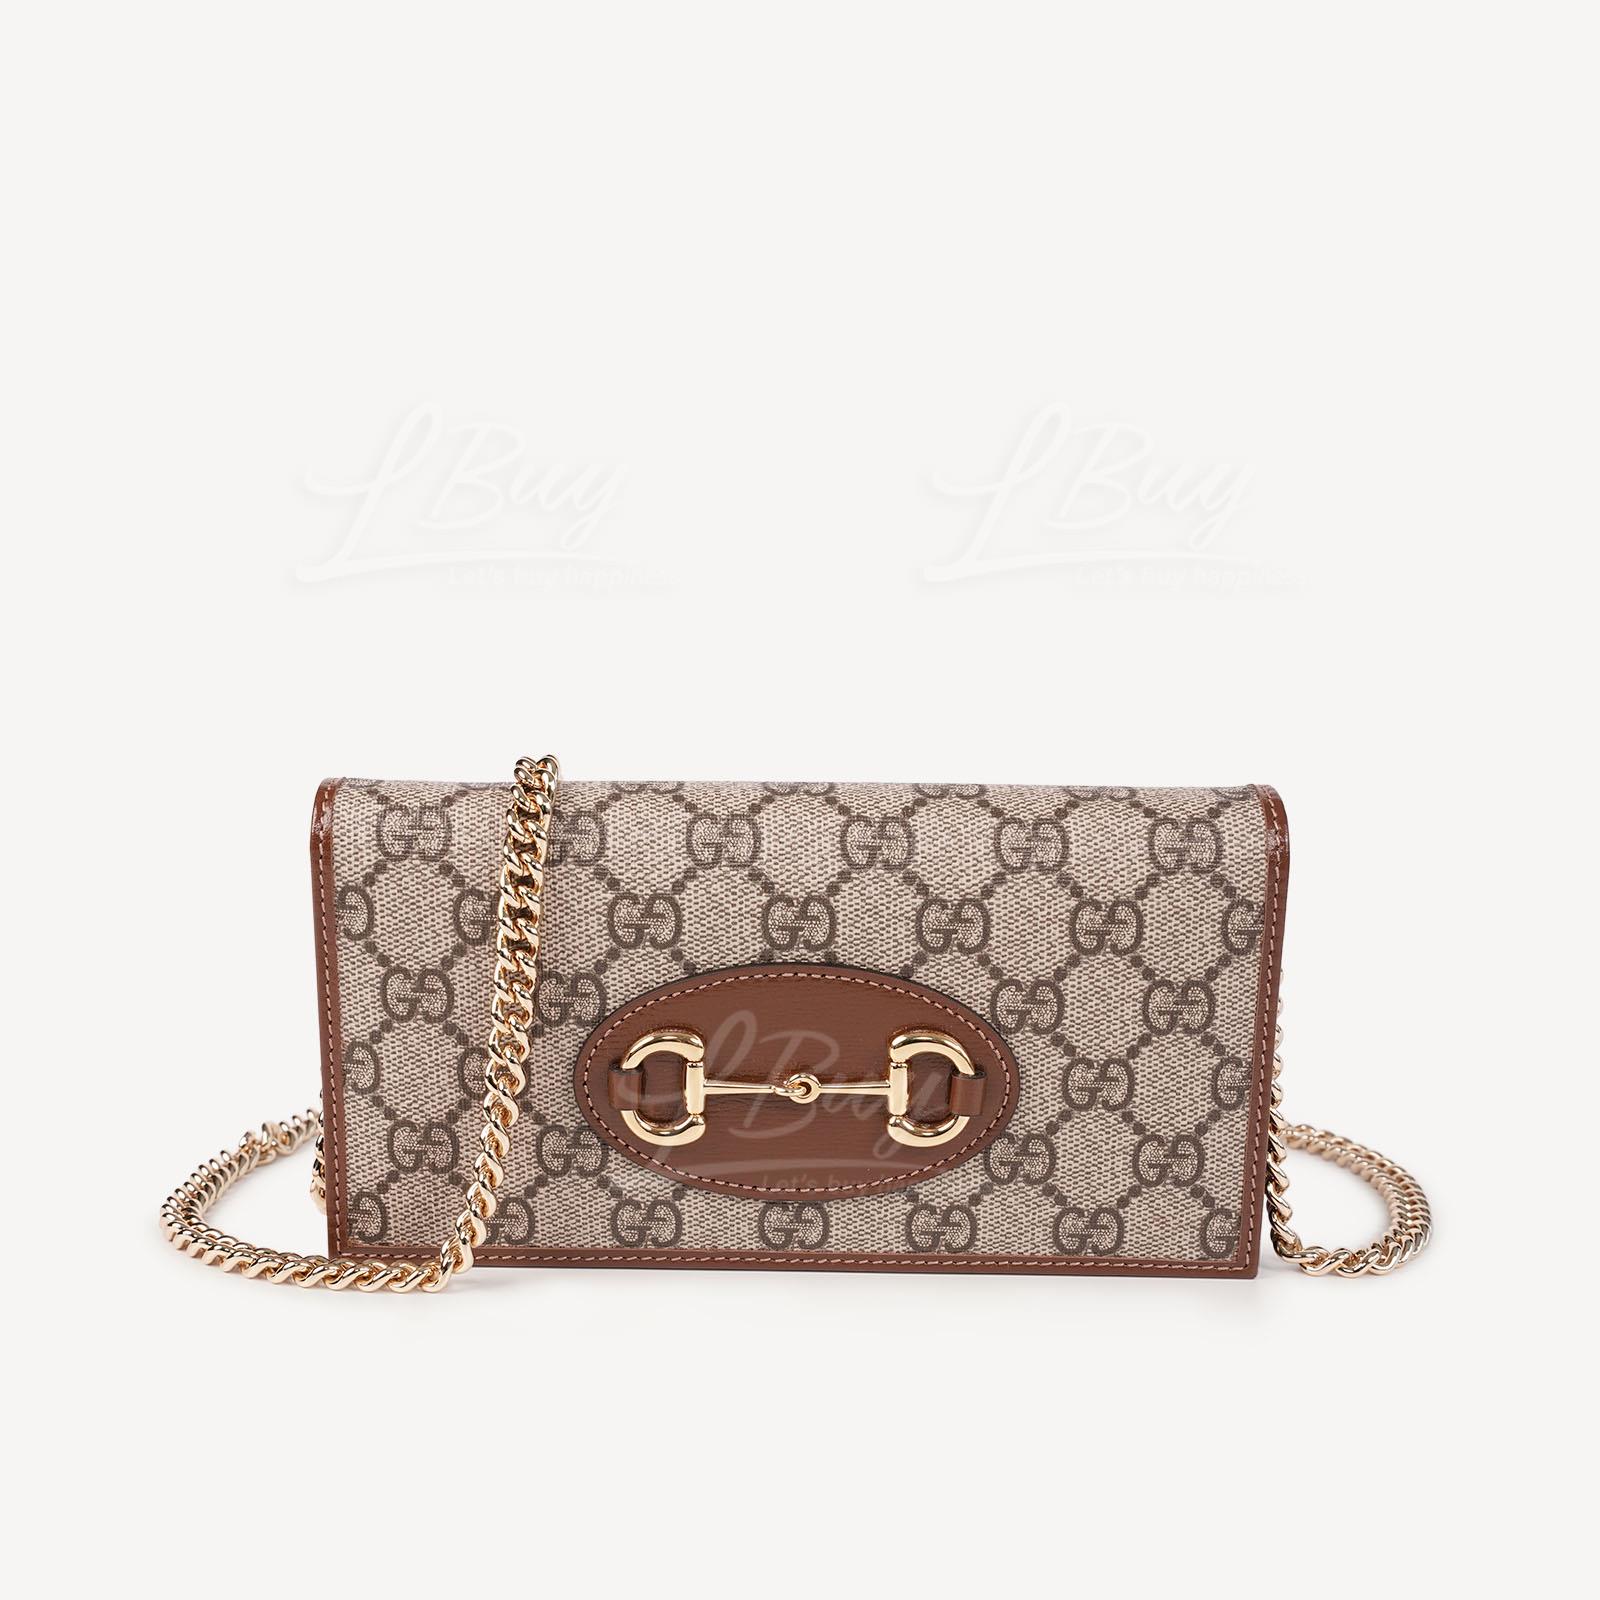 Gucci Horsebit 1955 Wallet With Chain 621892